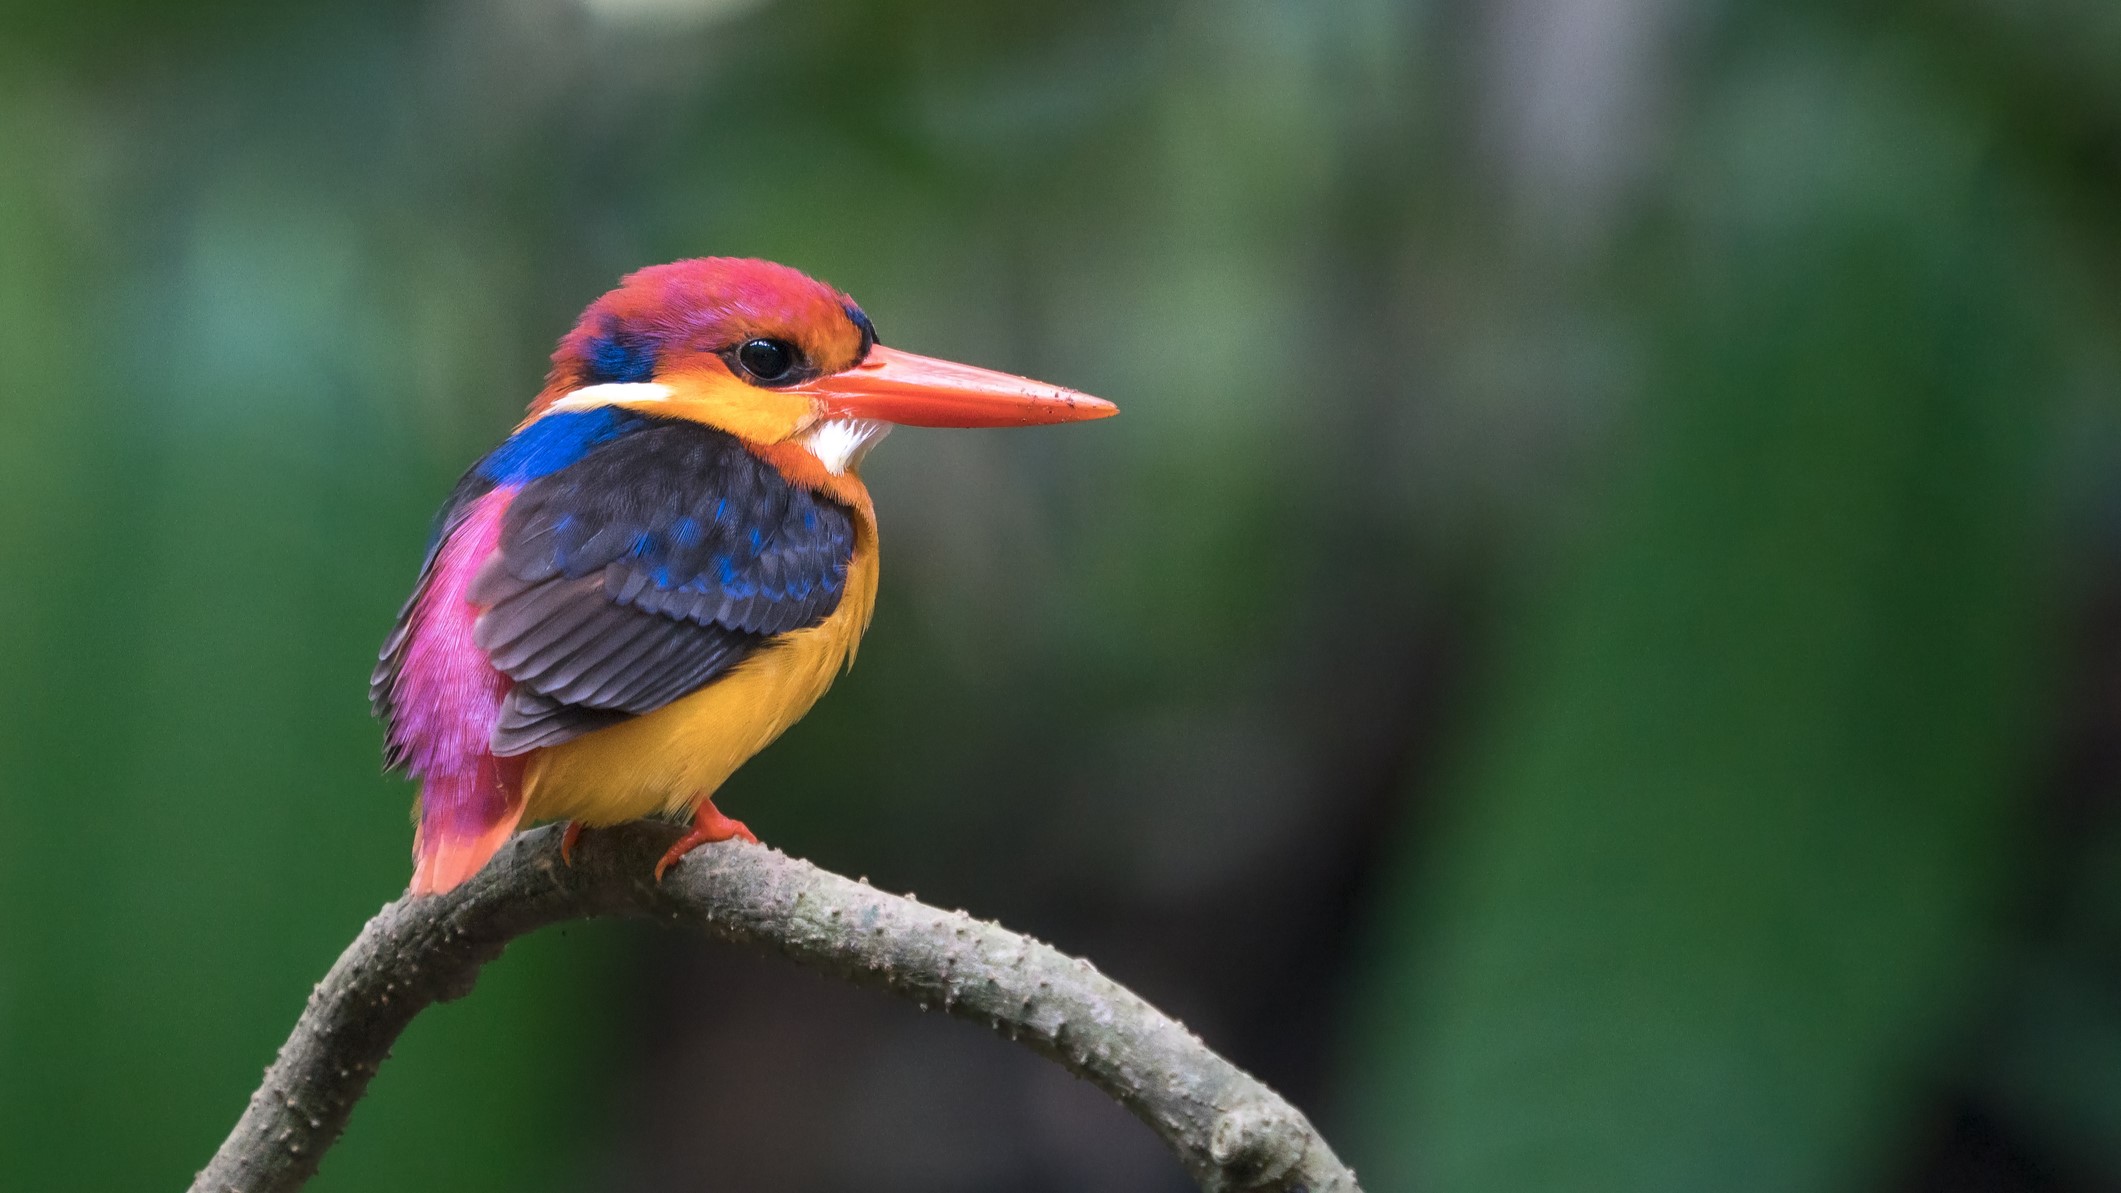 A black-backed dwarf kingfisher sitting on a branch while looking to its right.